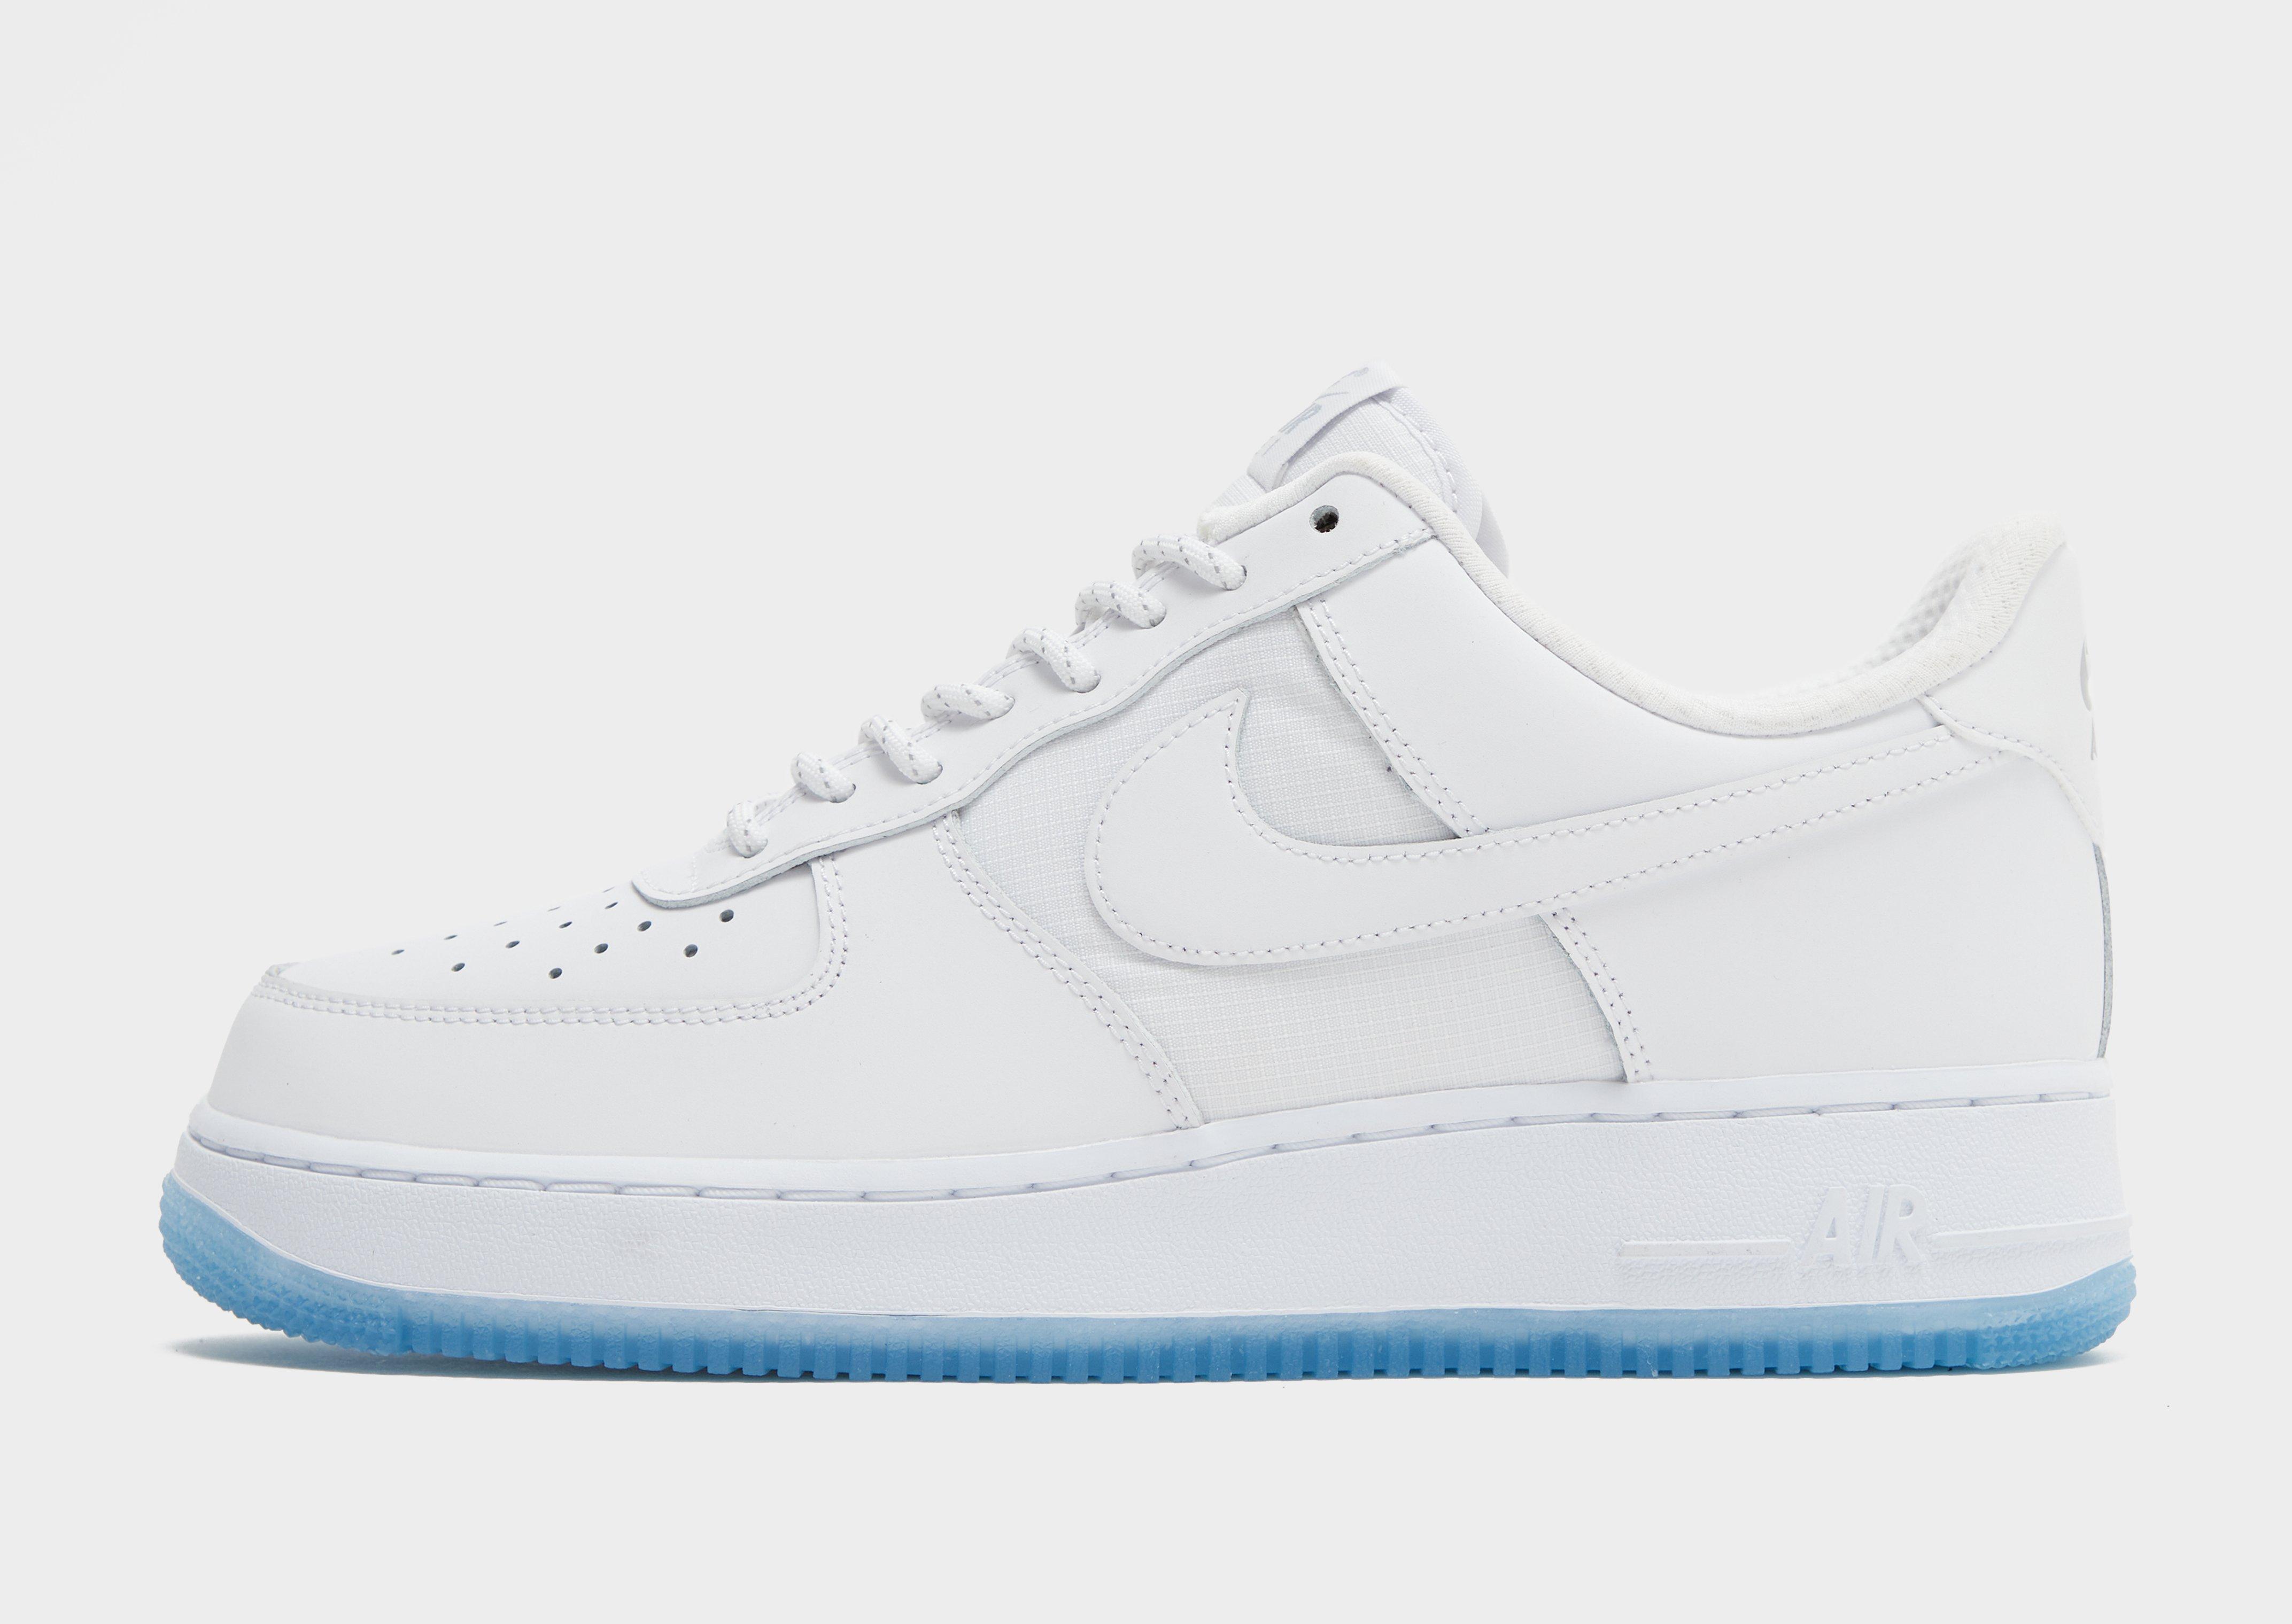 Air force 1 leather low trainers Nike White size 44.5 EU in